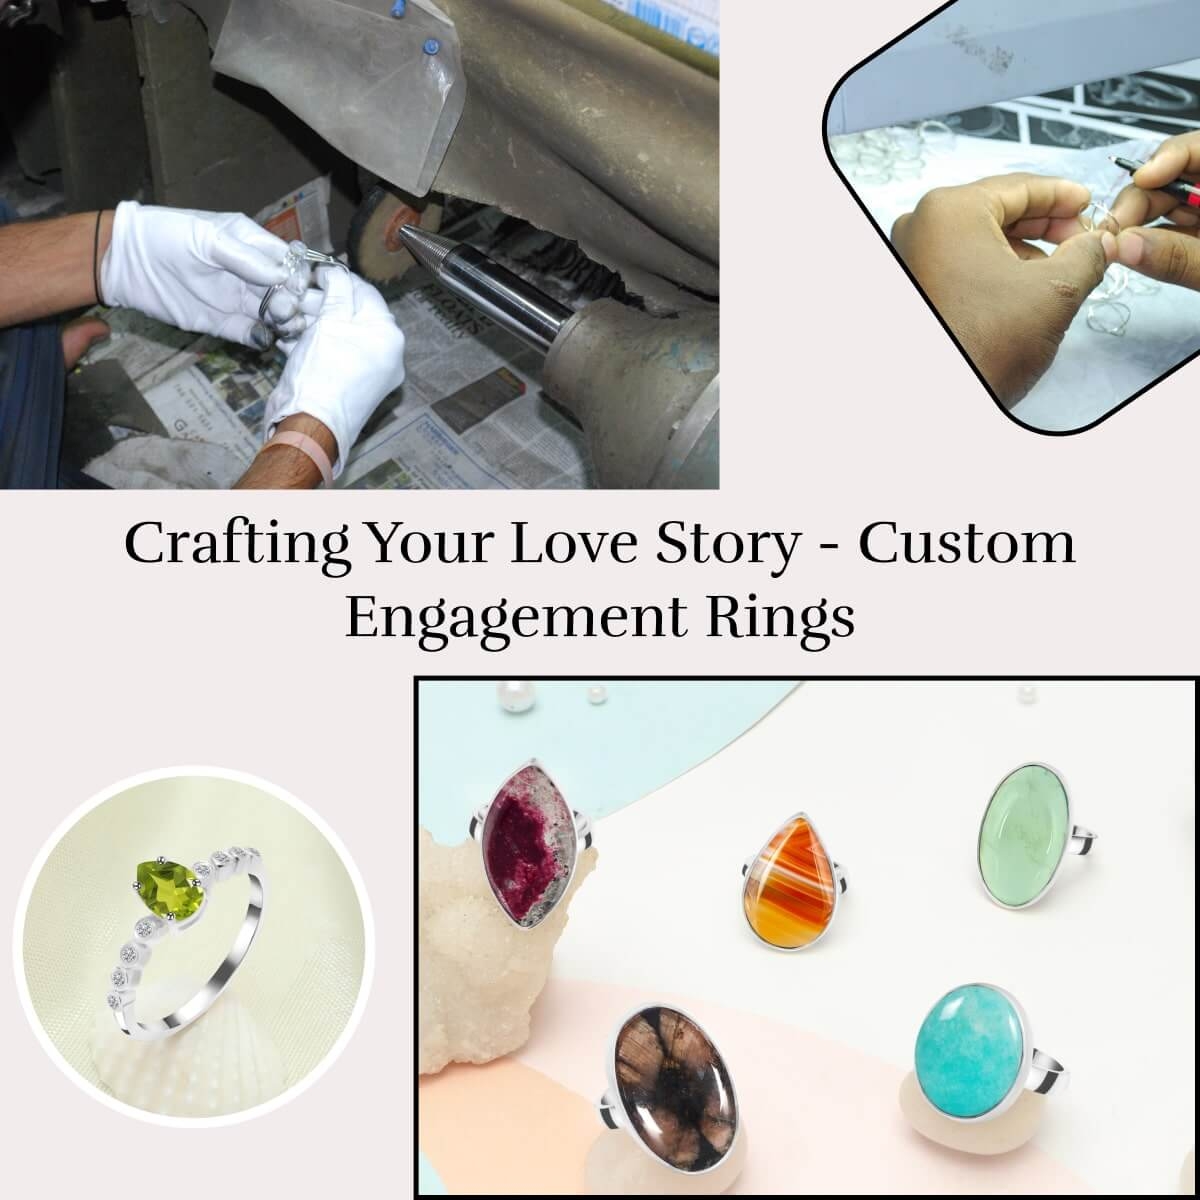 Process of how customized engagement rings are made